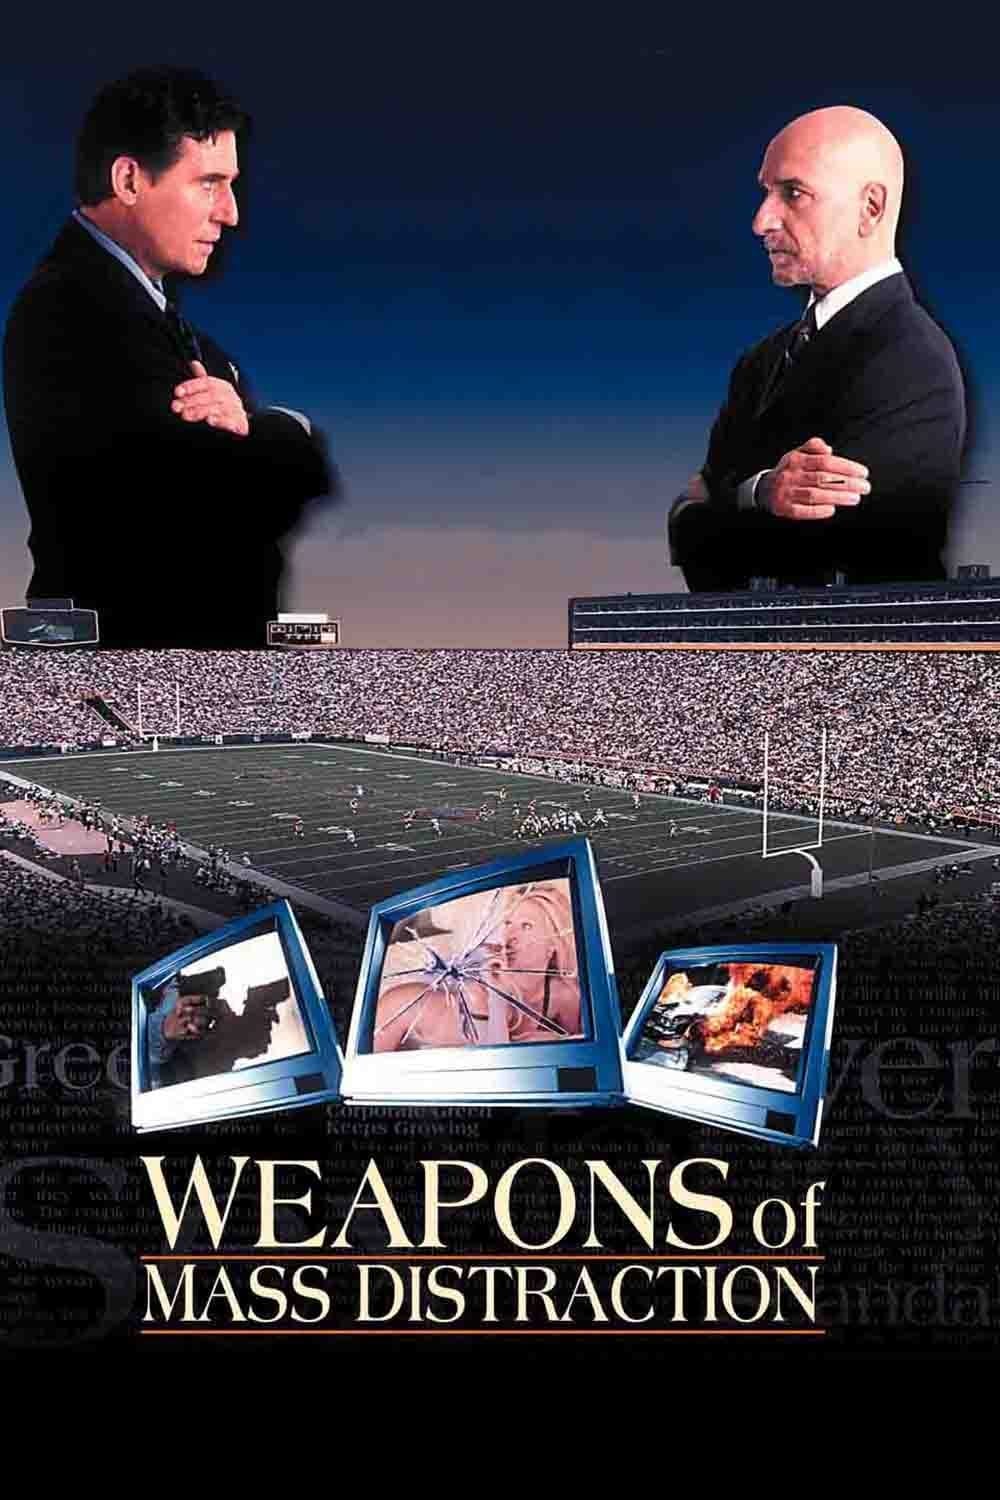 Weapons of Mass Distraction (1997) | Poster